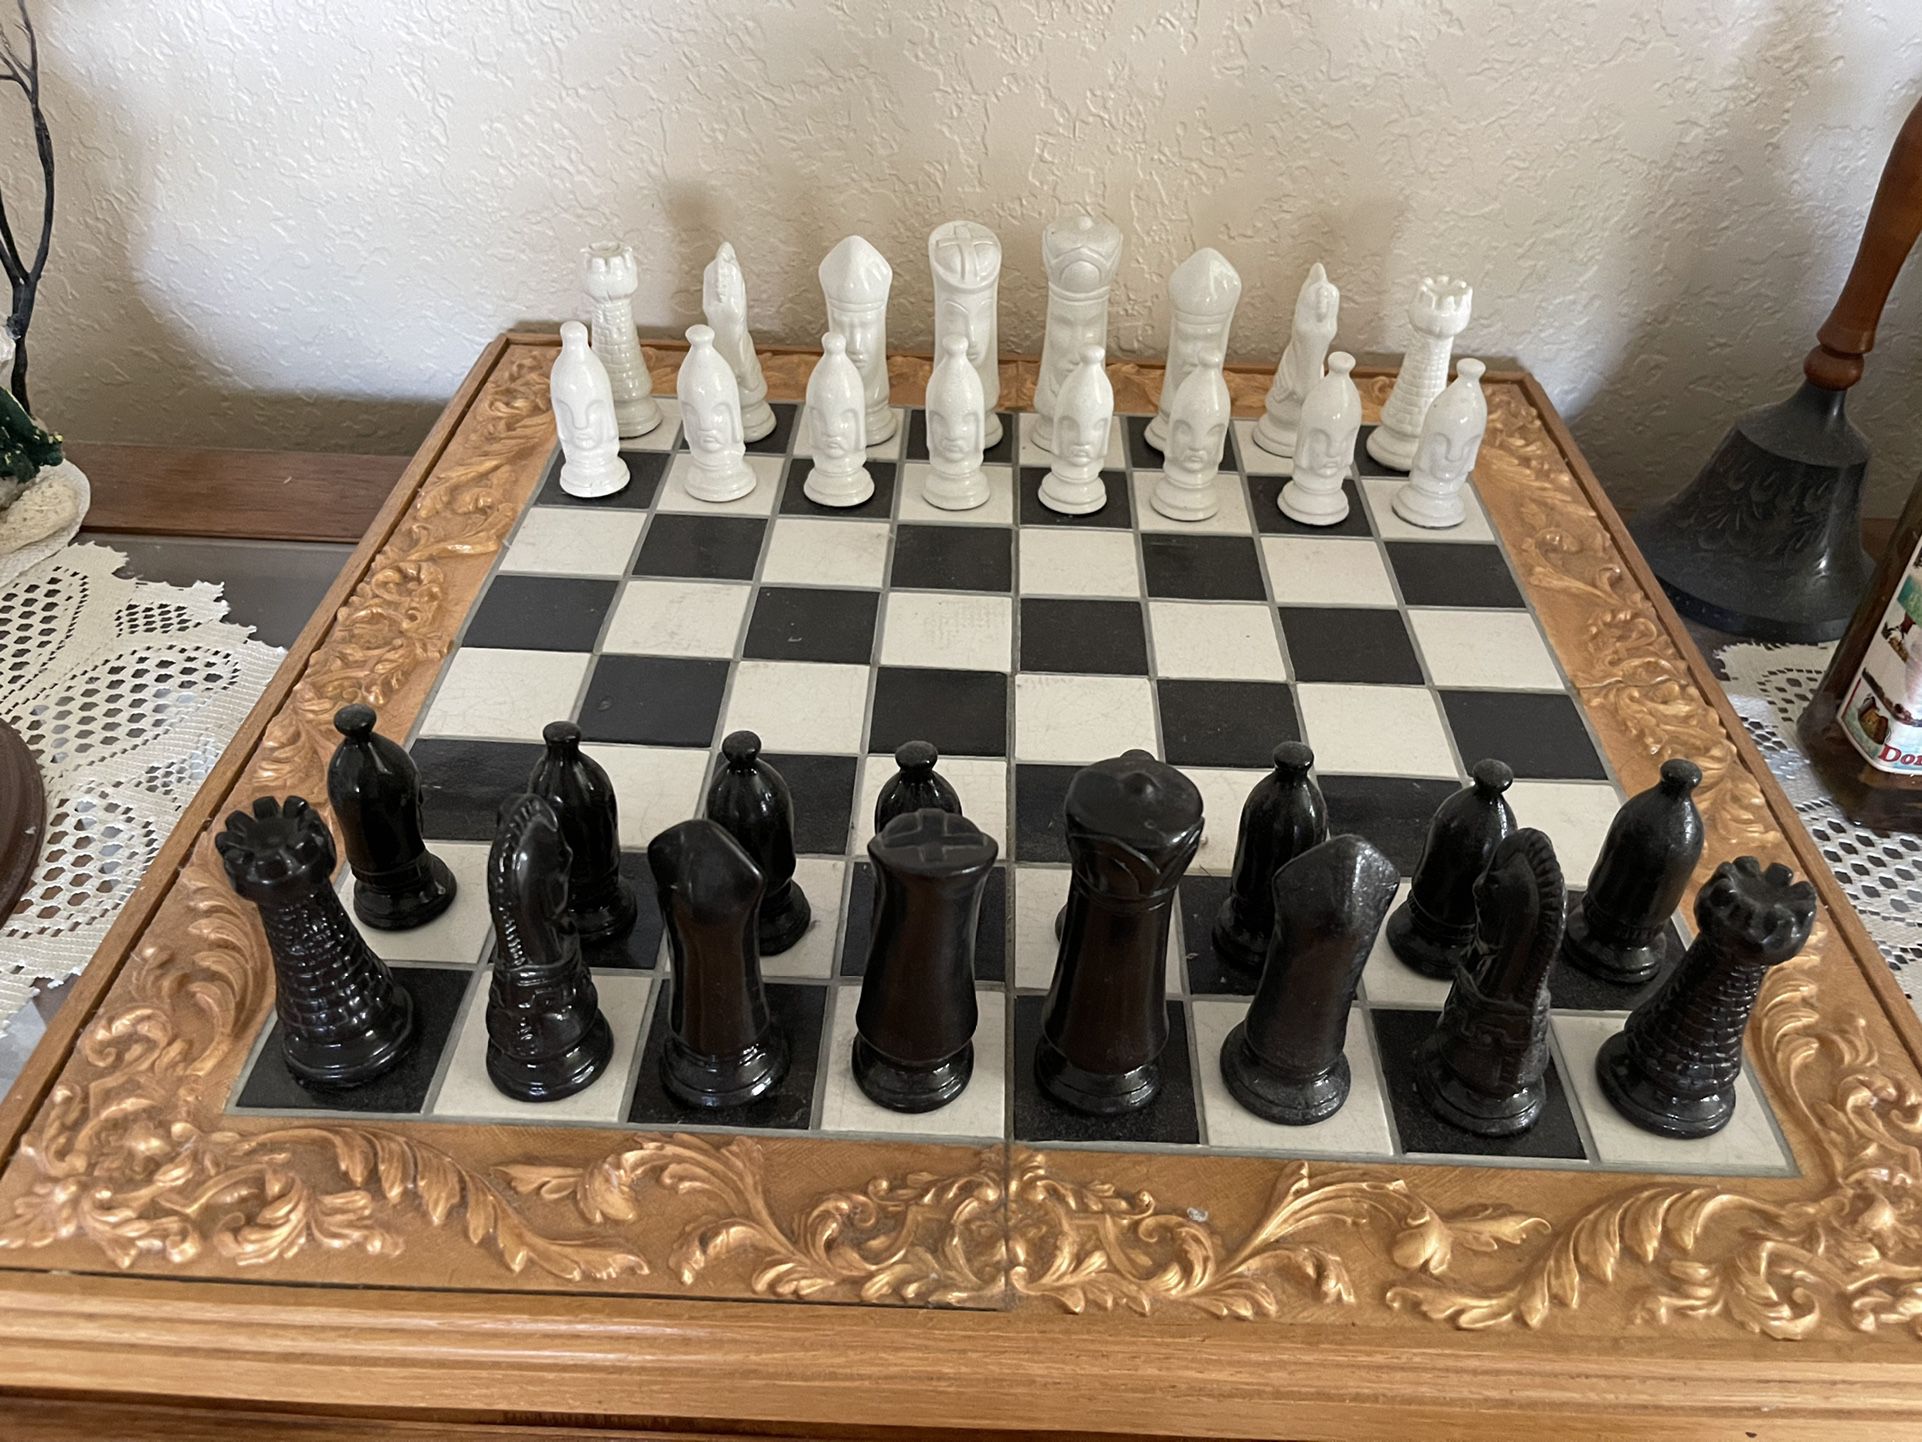 Glass Chess Board for Sale in El Paso, TX - OfferUp